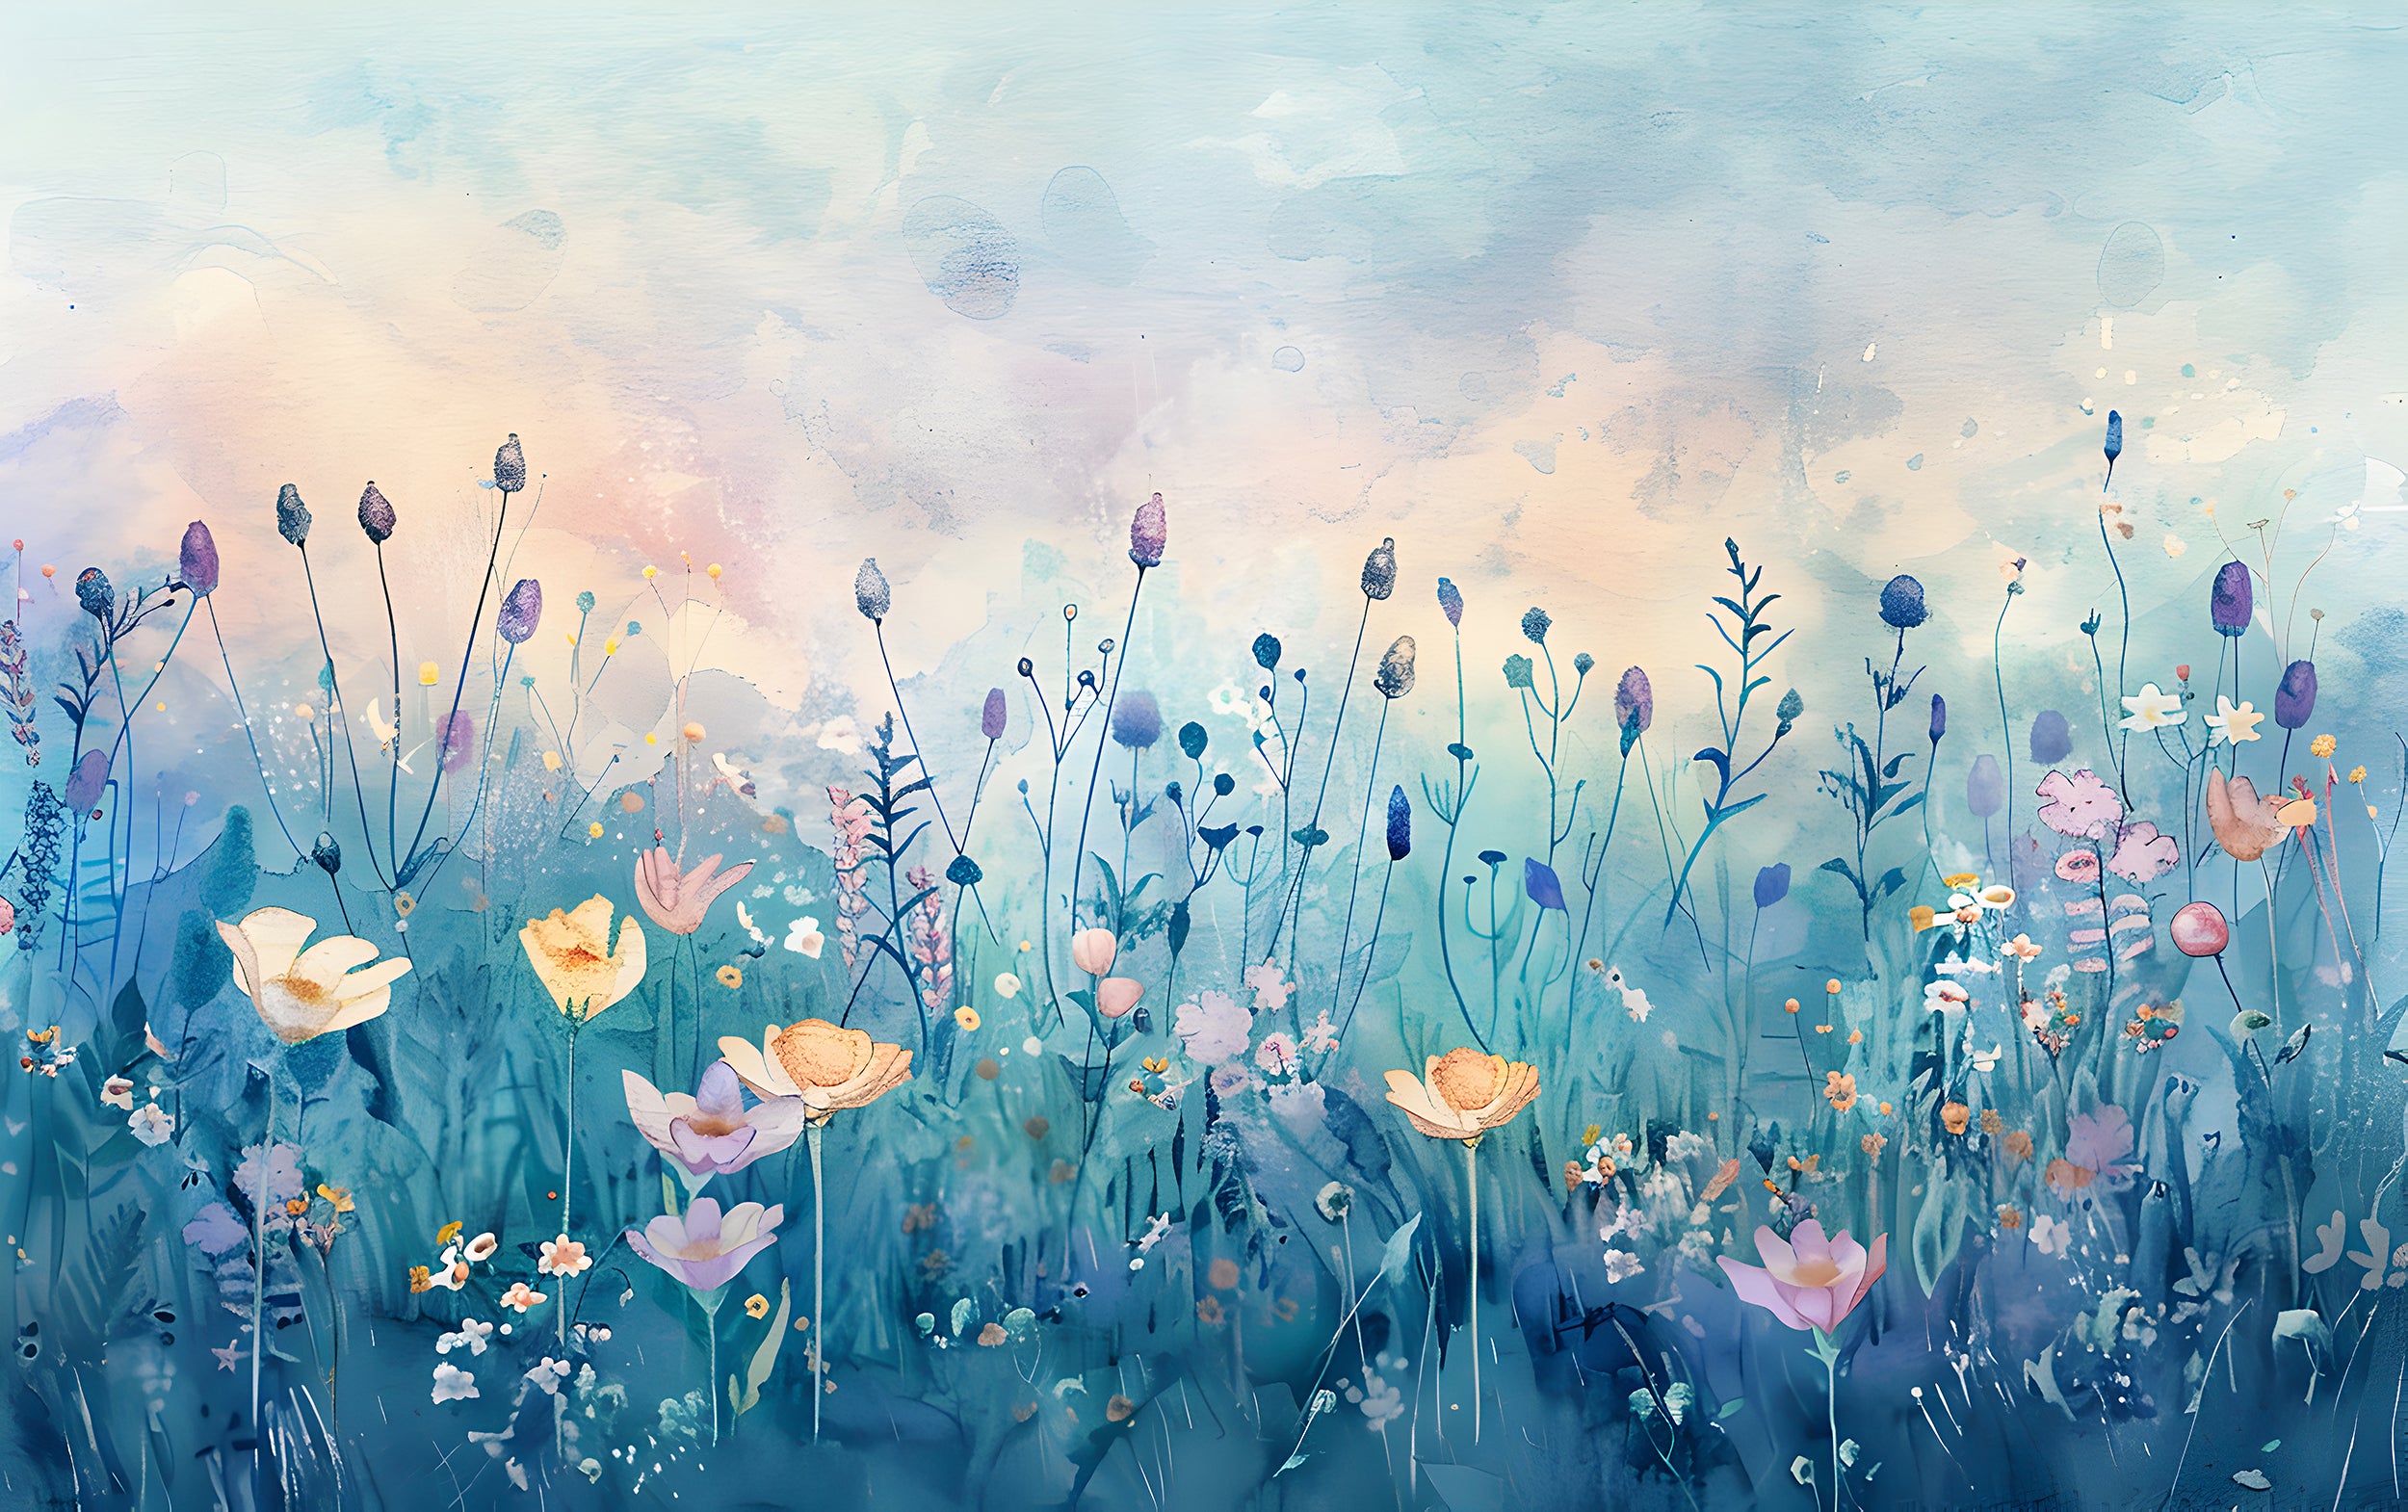 Blue Meadow Flowers Mural, Watercolor Flower Field Wallpaper, Pastel Colors Peel and Stick Floral Wall Mural, Removable Botanical Art, PVC-free